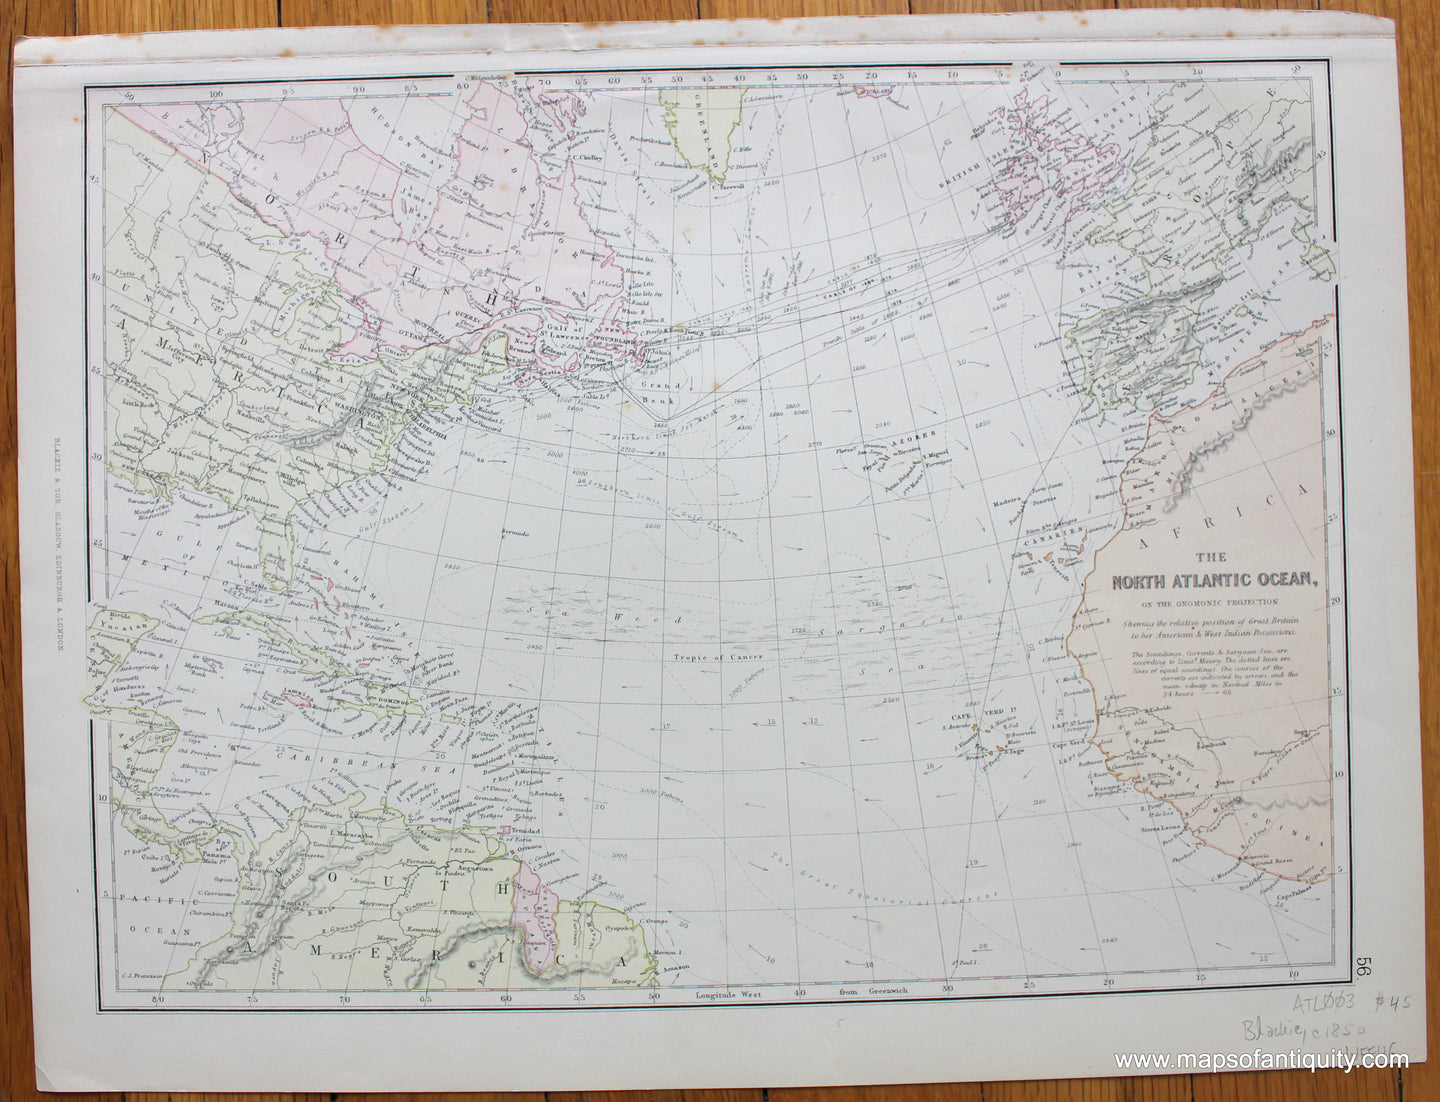 Antique-Printed-Color-Map-The-North-Atlantic-Ocean-on-the-Gnomonic-Projection-World--c.-1880-Blackie-Maps-Of-Antiquity